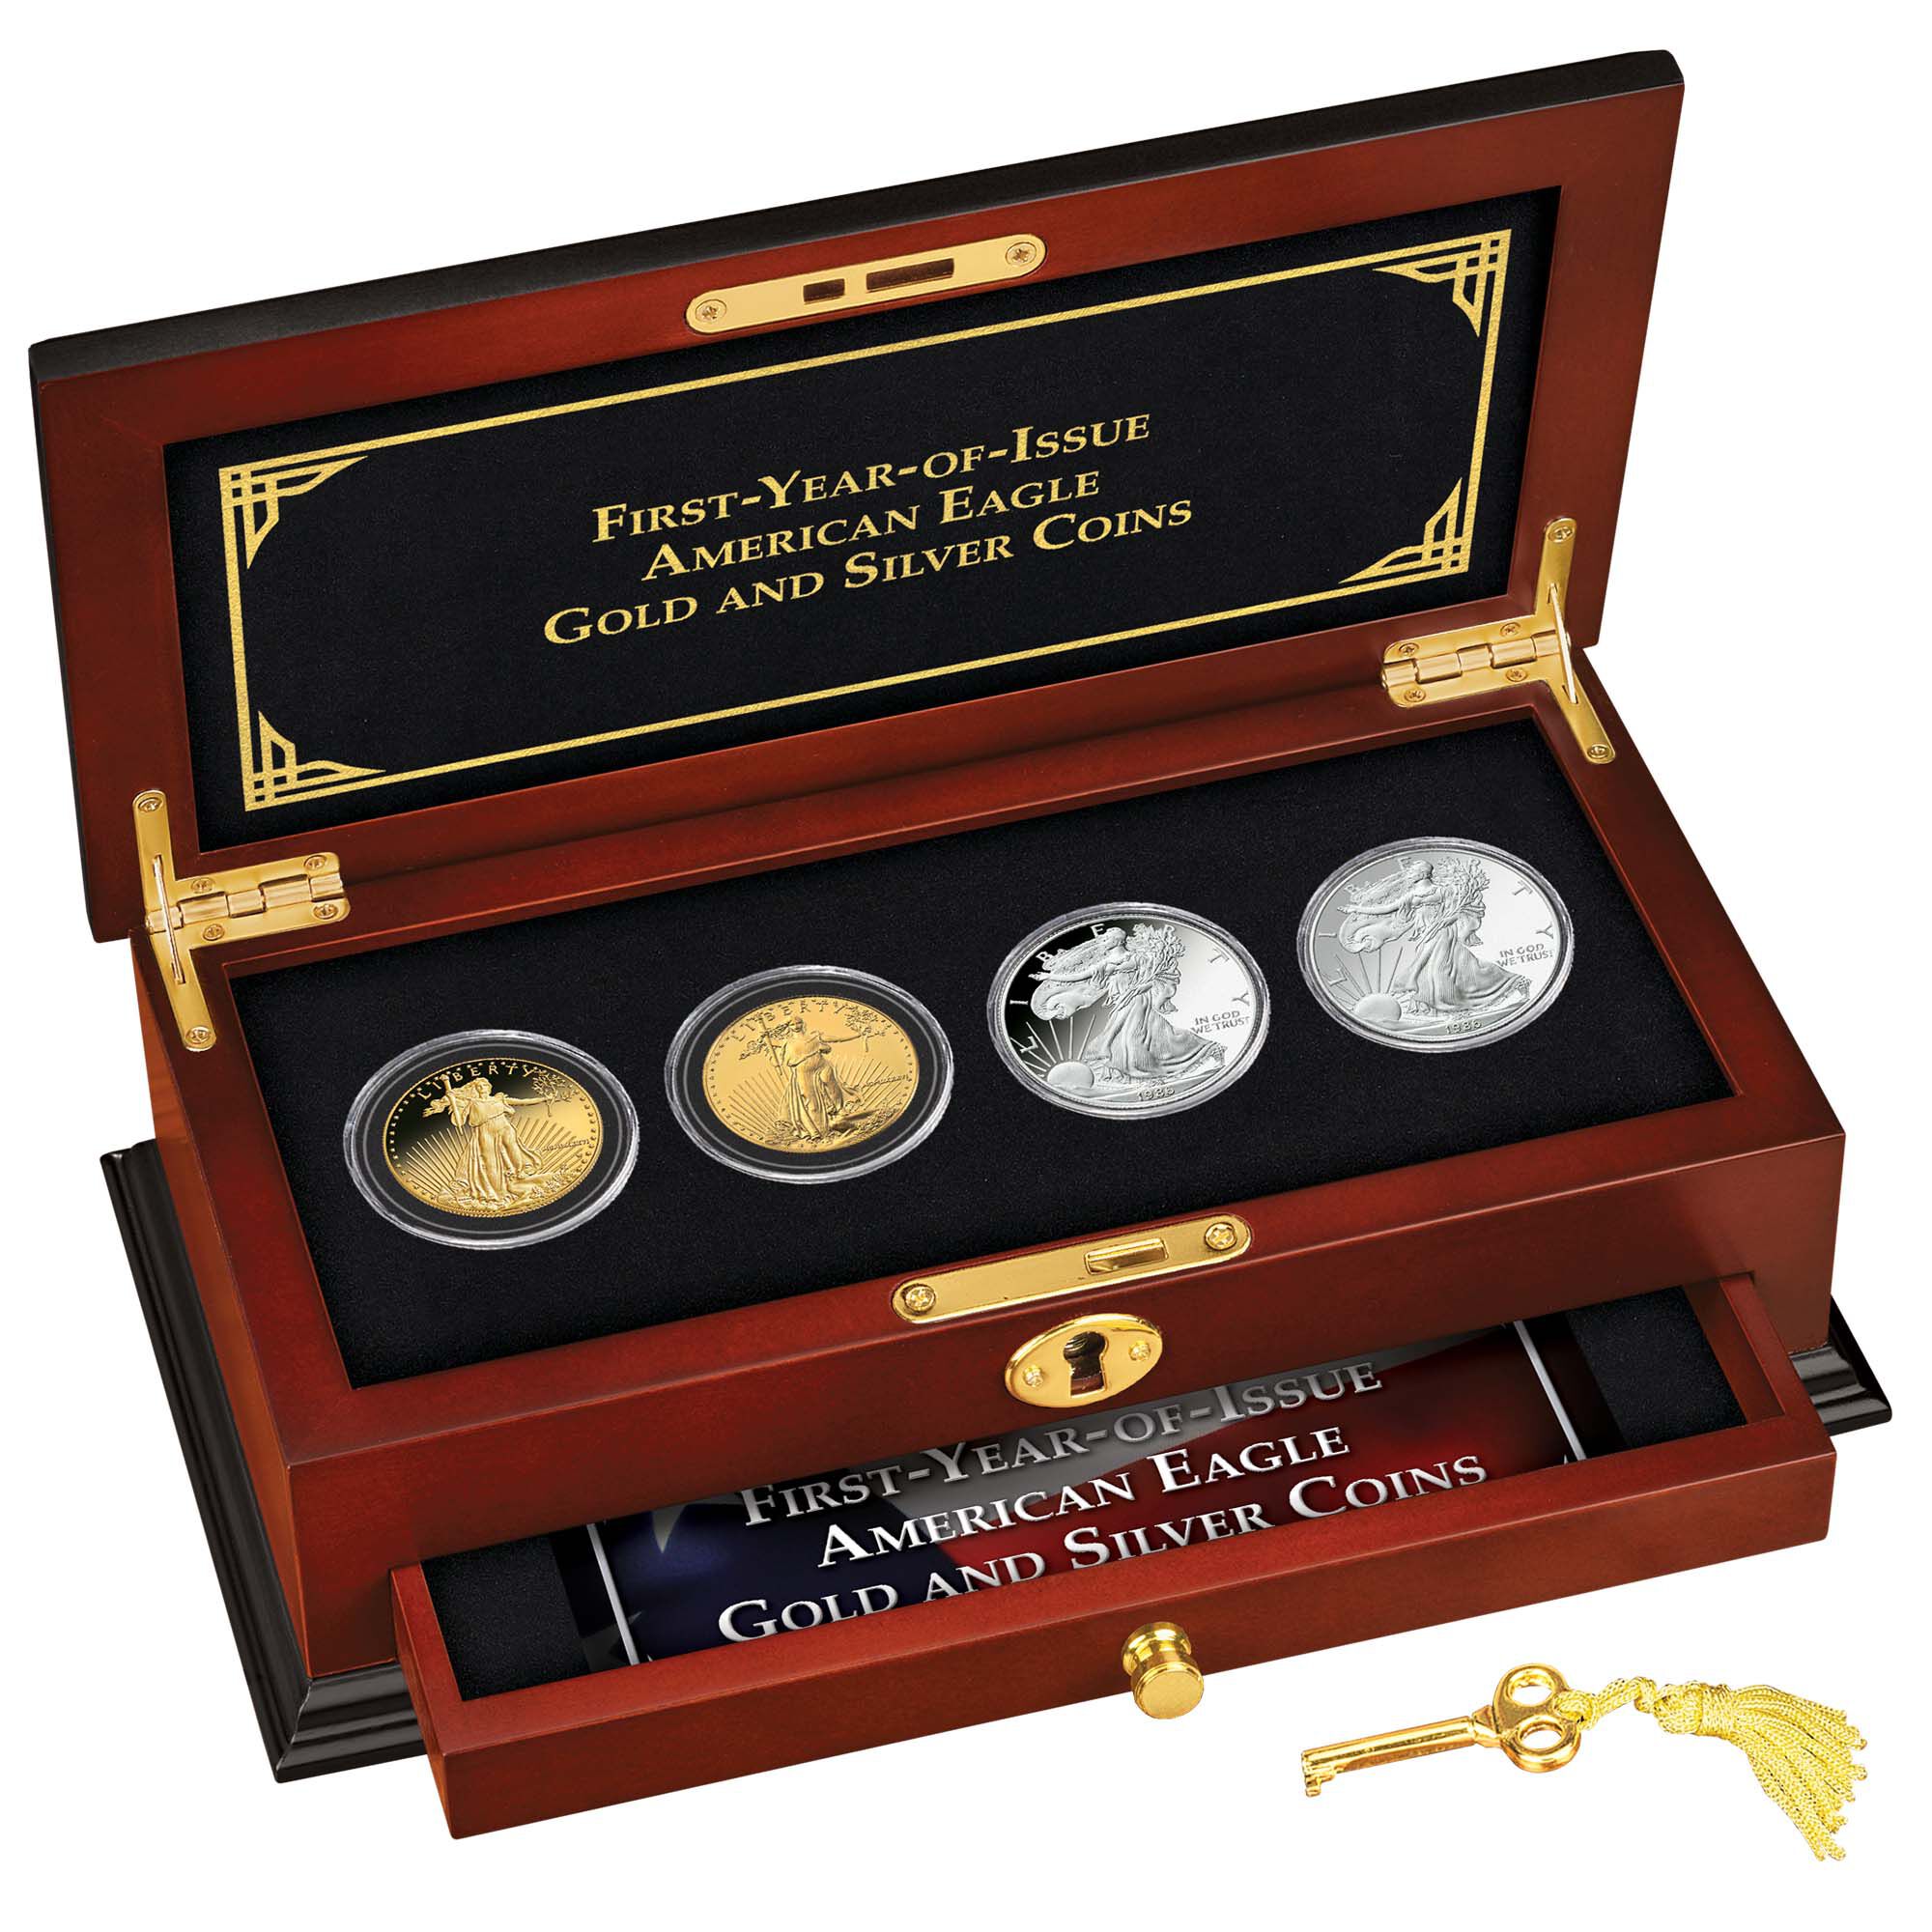 First-Year-of-Issue American Eagle Gold and Silver Coins